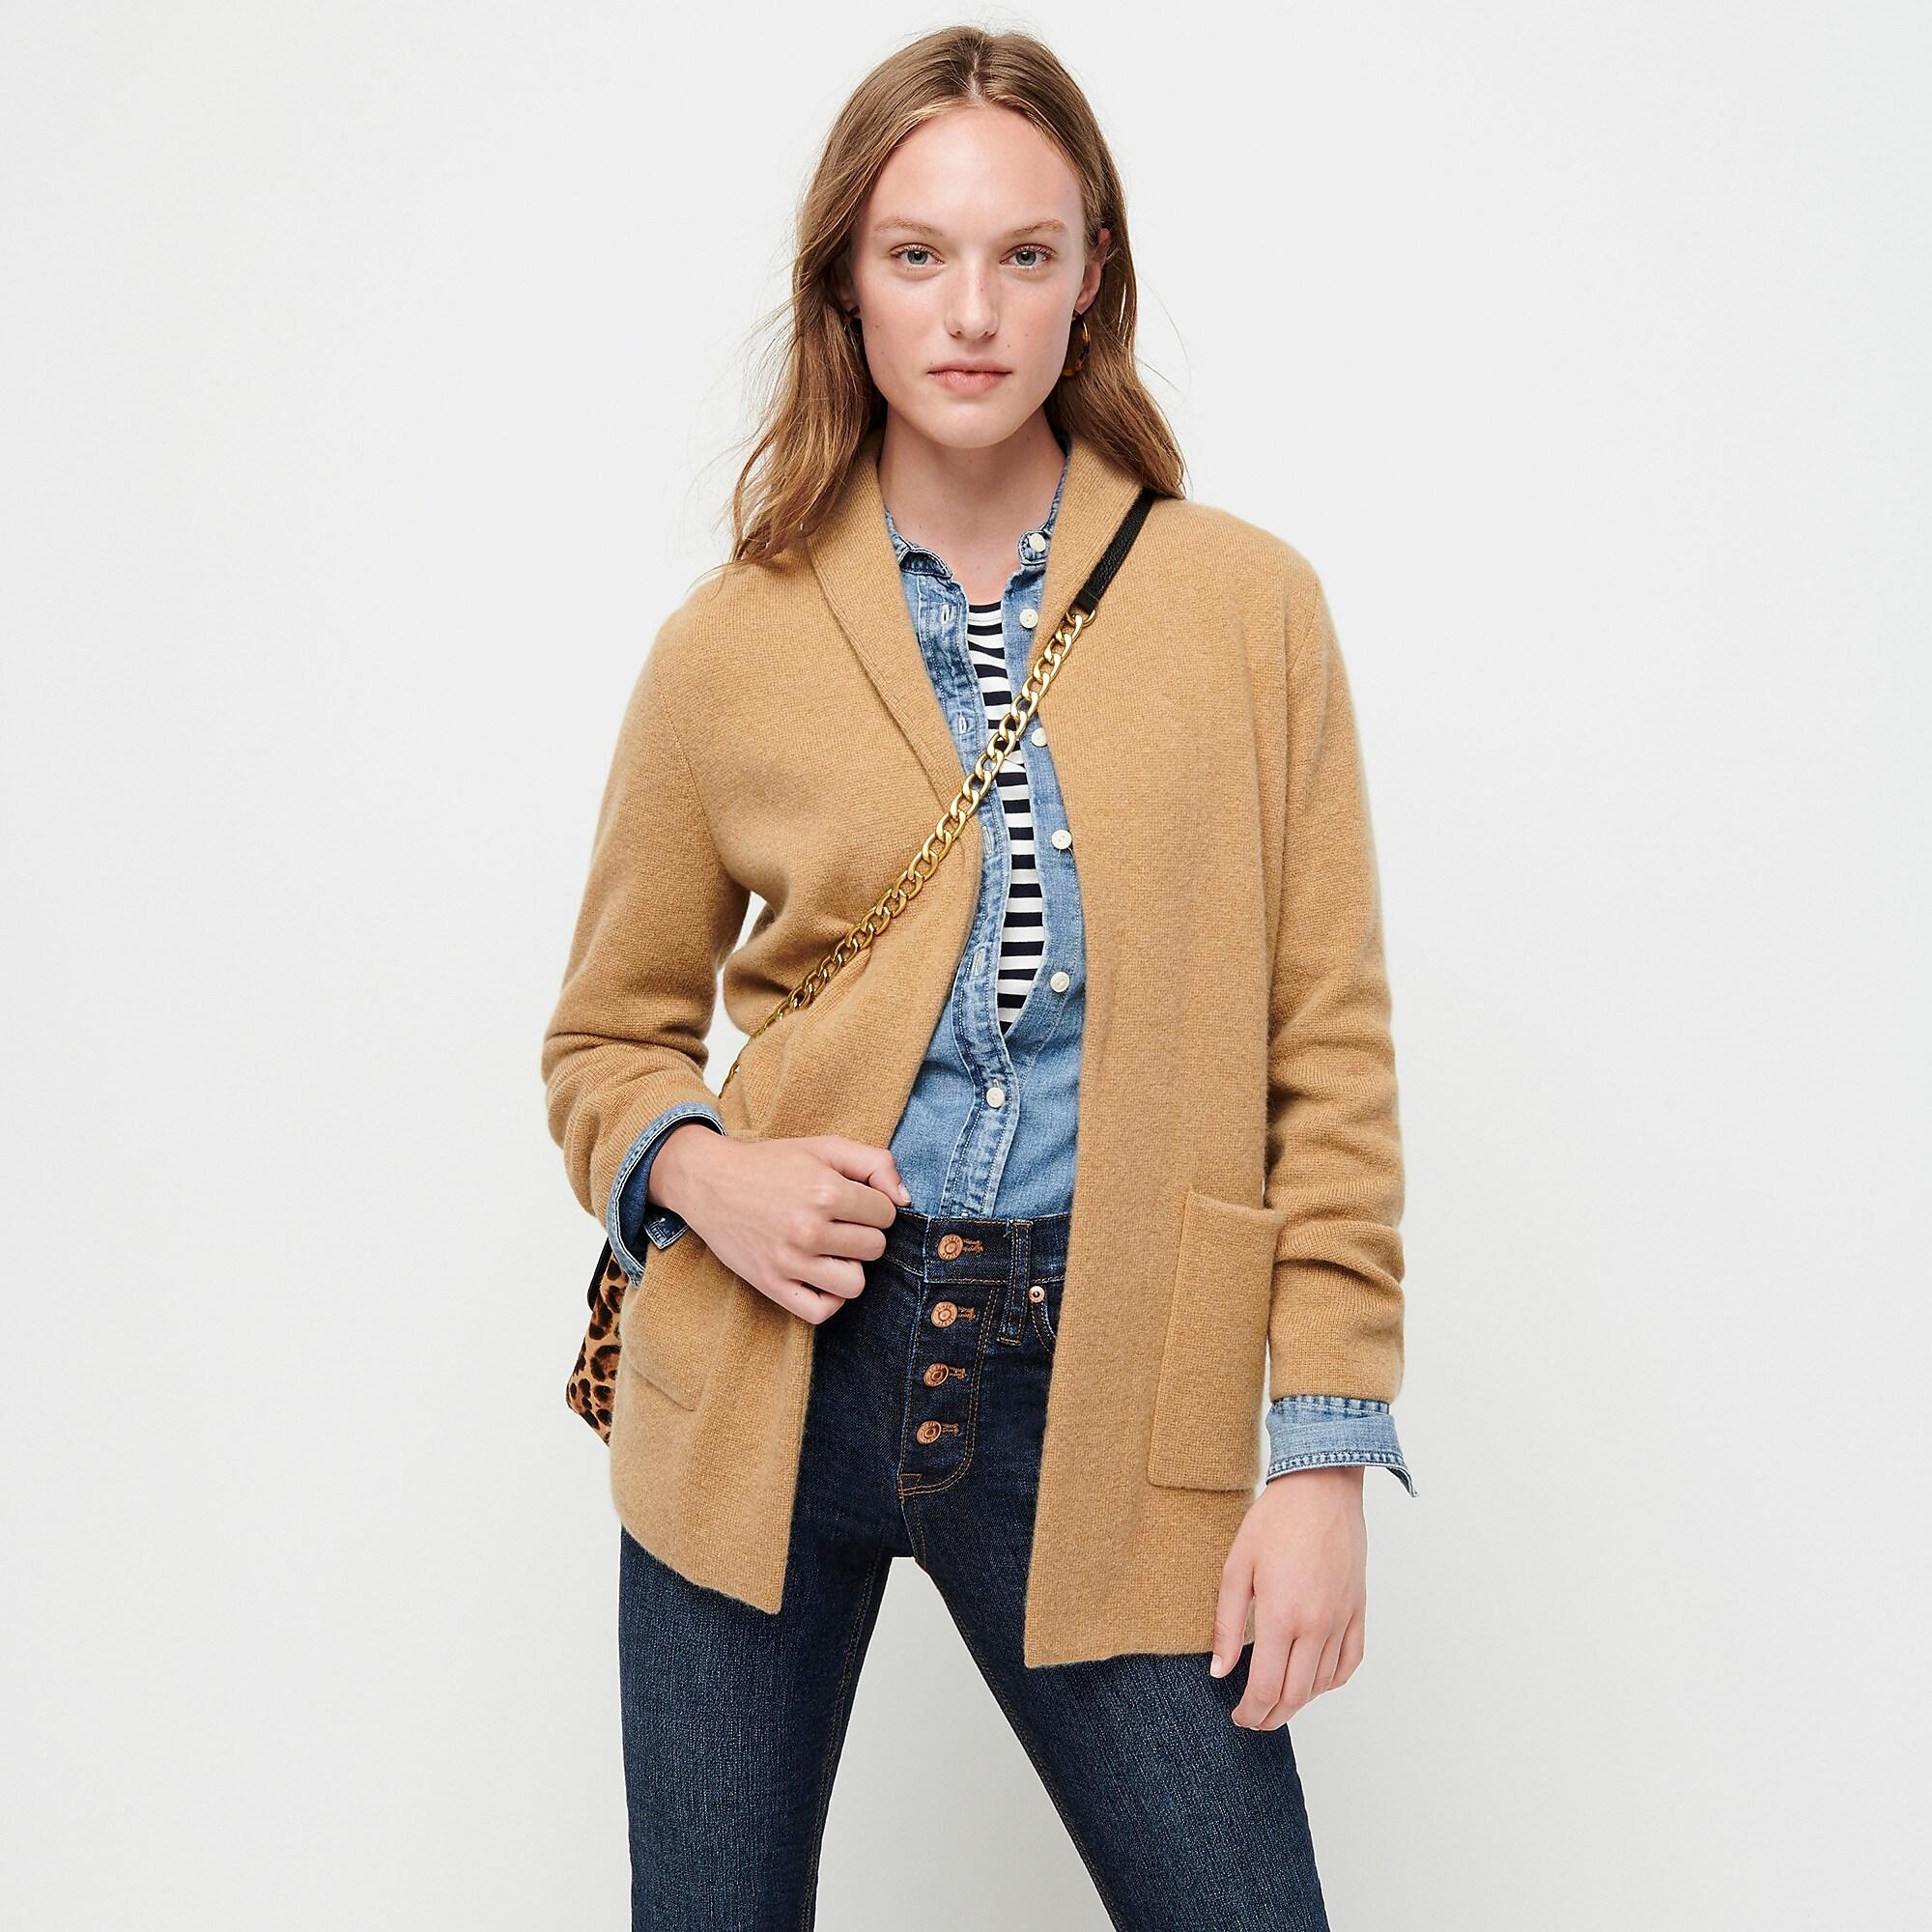 J.Crew Open-front Sweater-blazer In Everyday Cashmere in Natural - Lyst